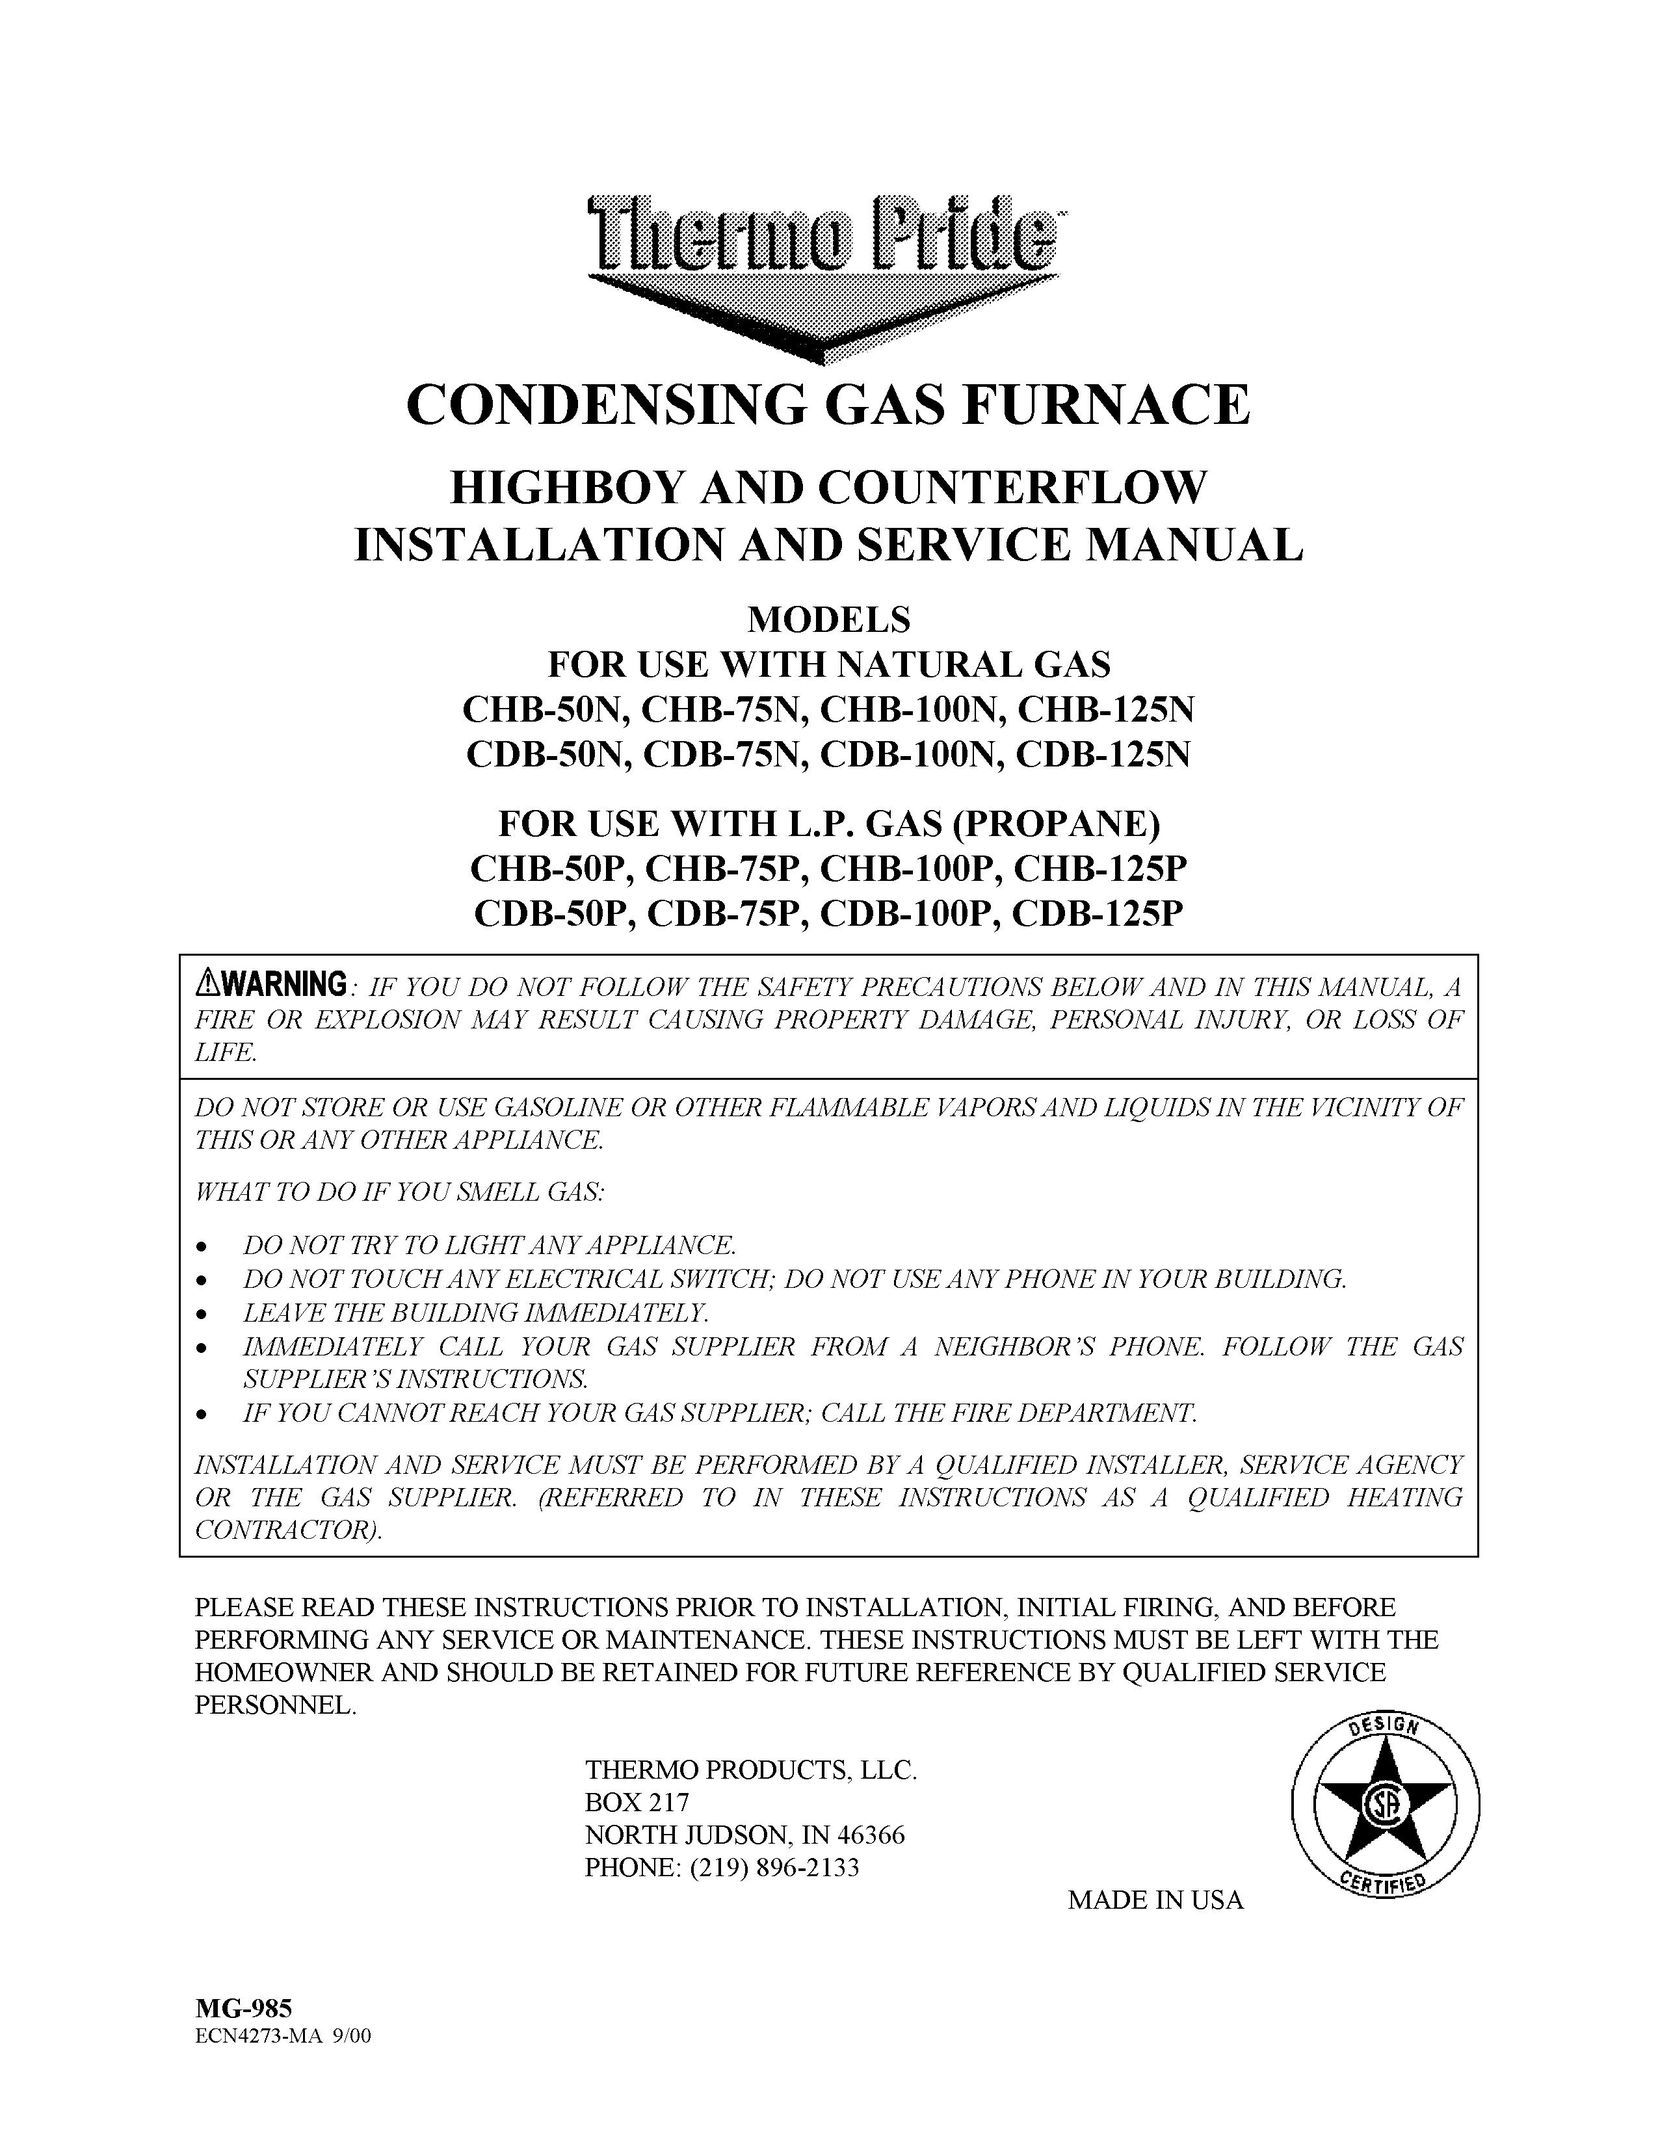 Thermo Products CDB-75N Furnace User Manual